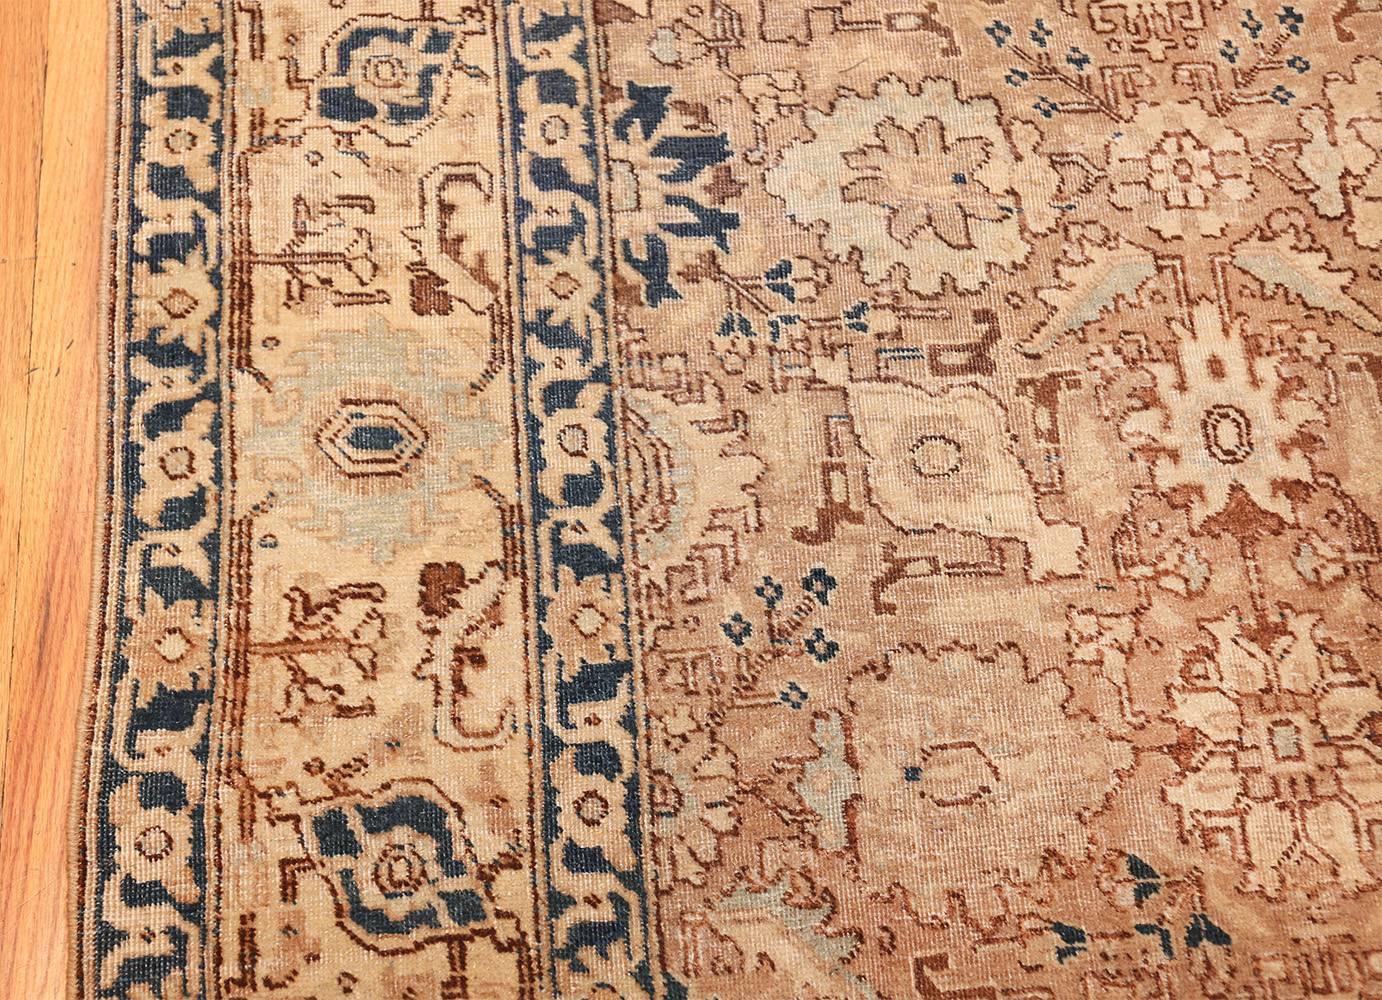 Wool Decorative Neutral Antique Room Size Persian Tabriz Rug. Size: 6 ft 4 in x 10 ft